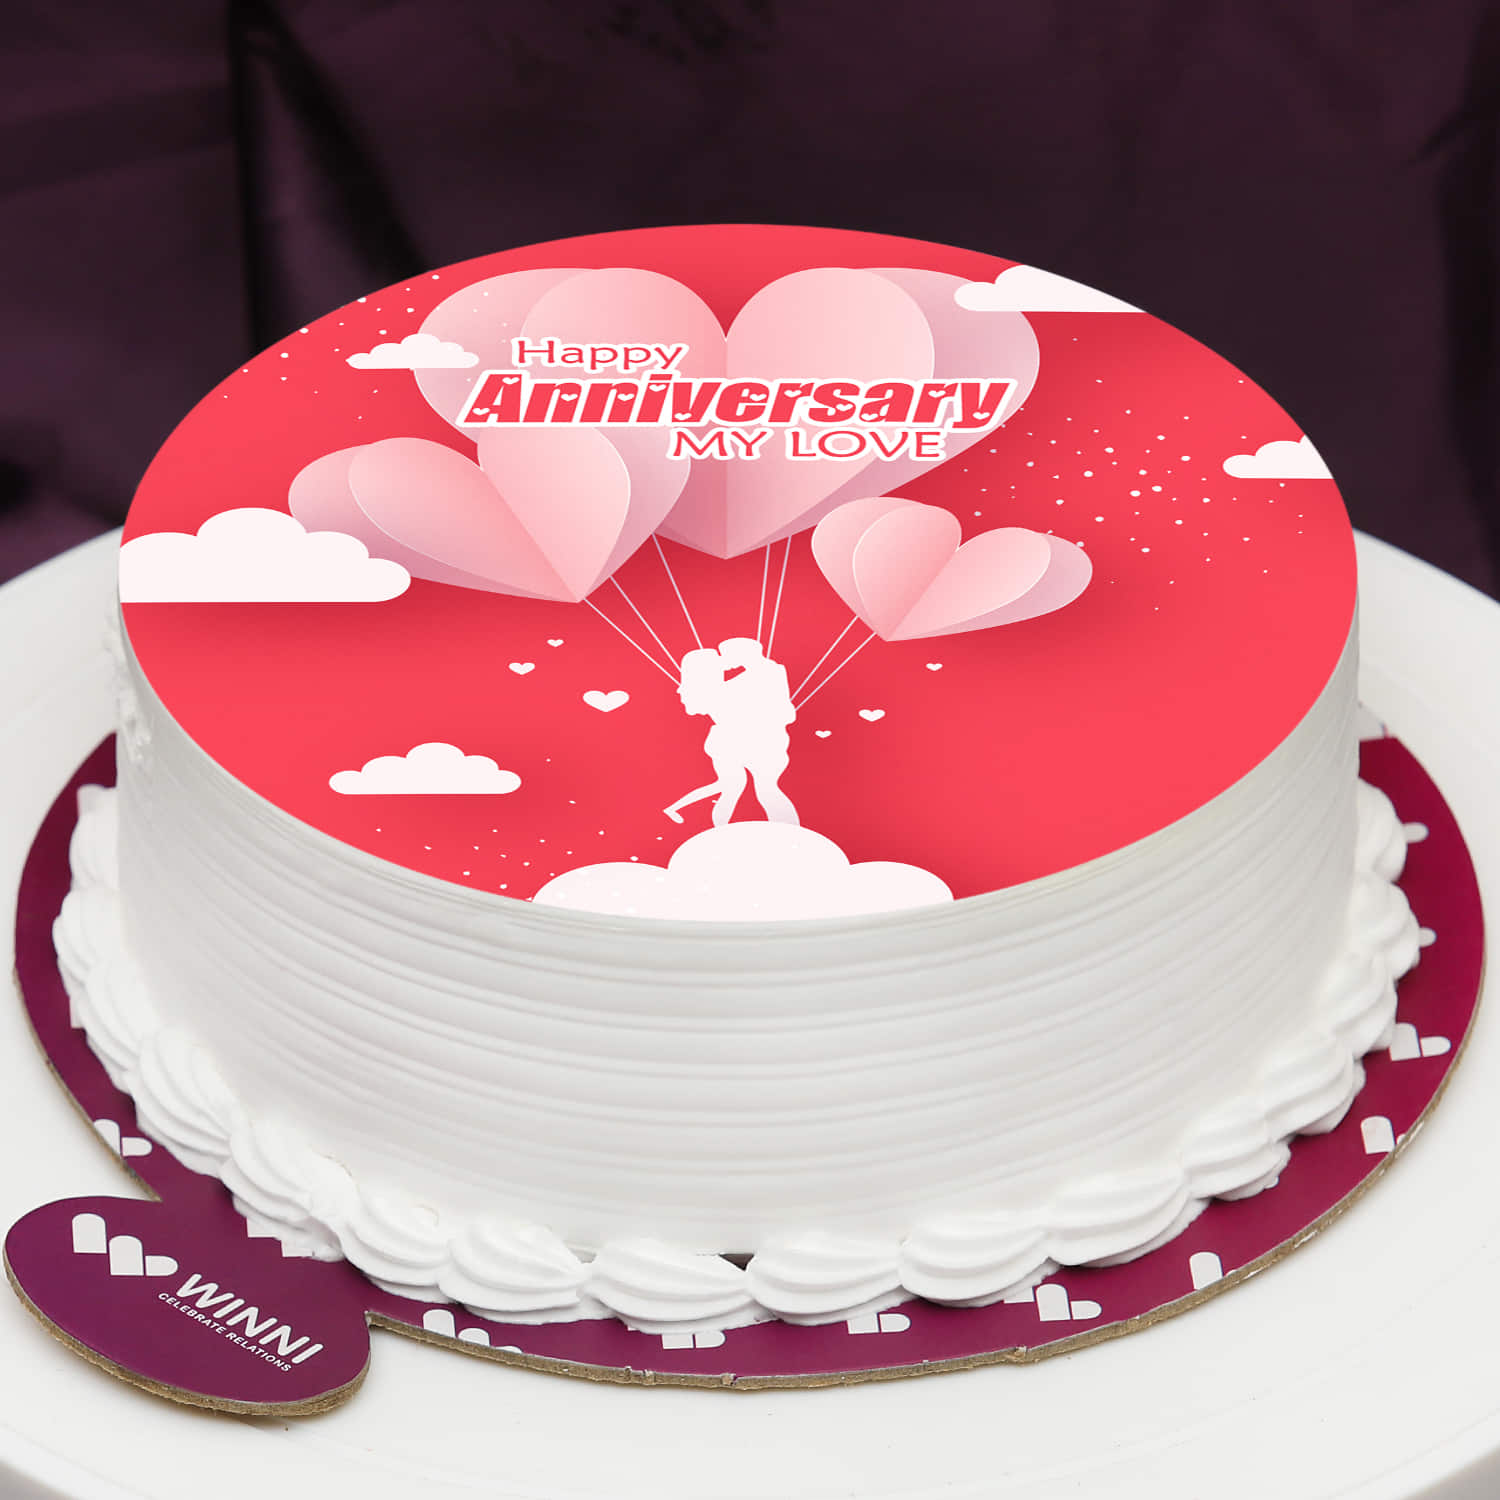 Anniversary Cake Delivery in Chennai | 20% OFF | Free Delivery - Chennai  Online Florists